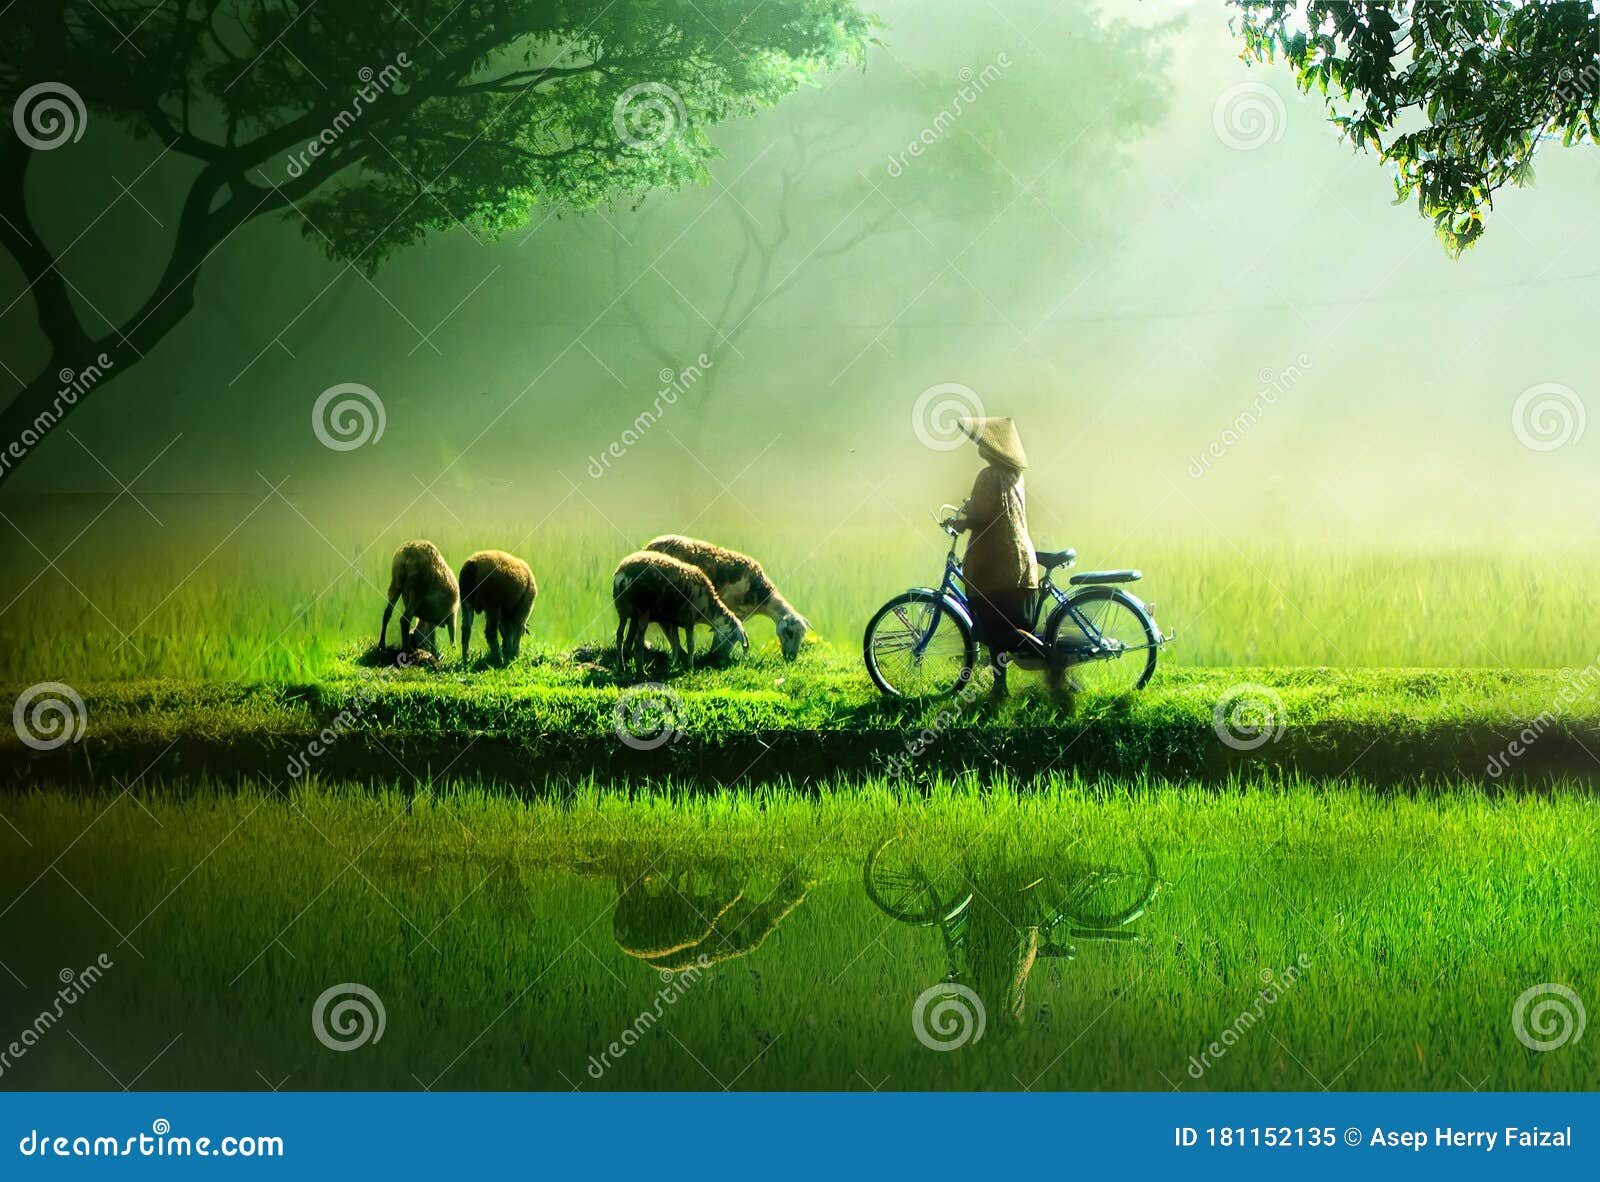 goat herder by the rice land